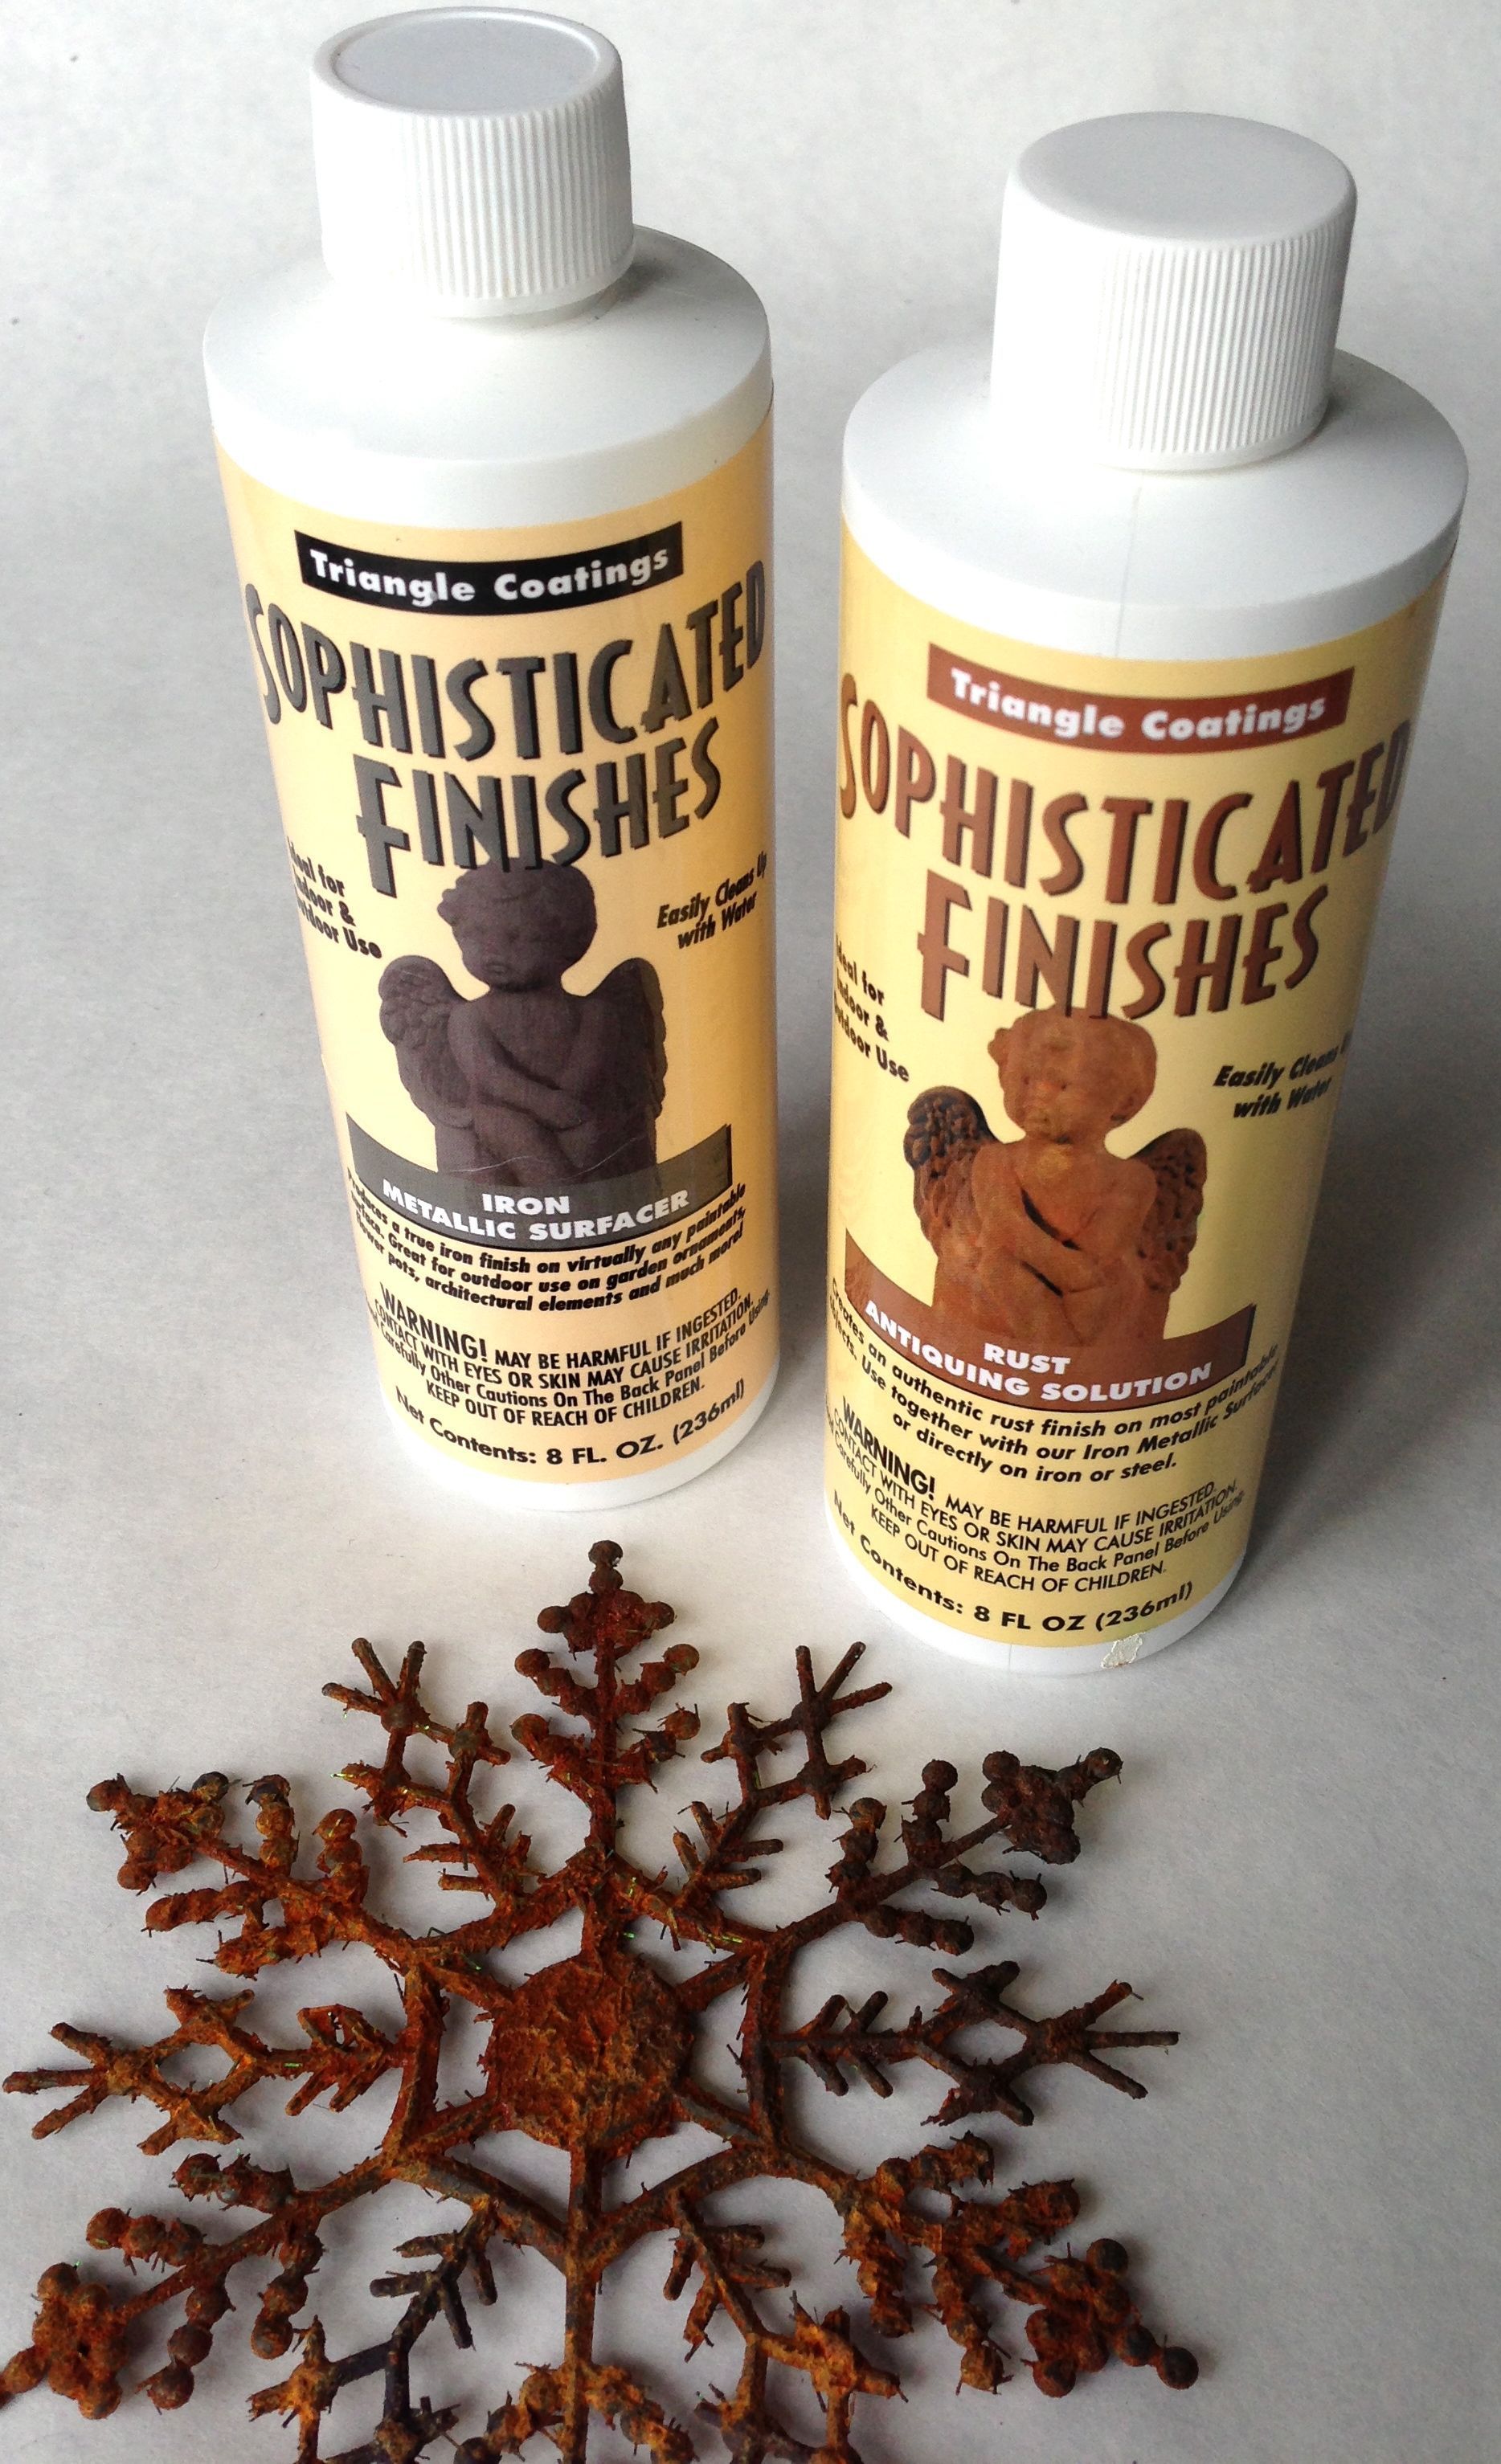 revamped $ store plastic snowflakes – check out these rusty looking fellas